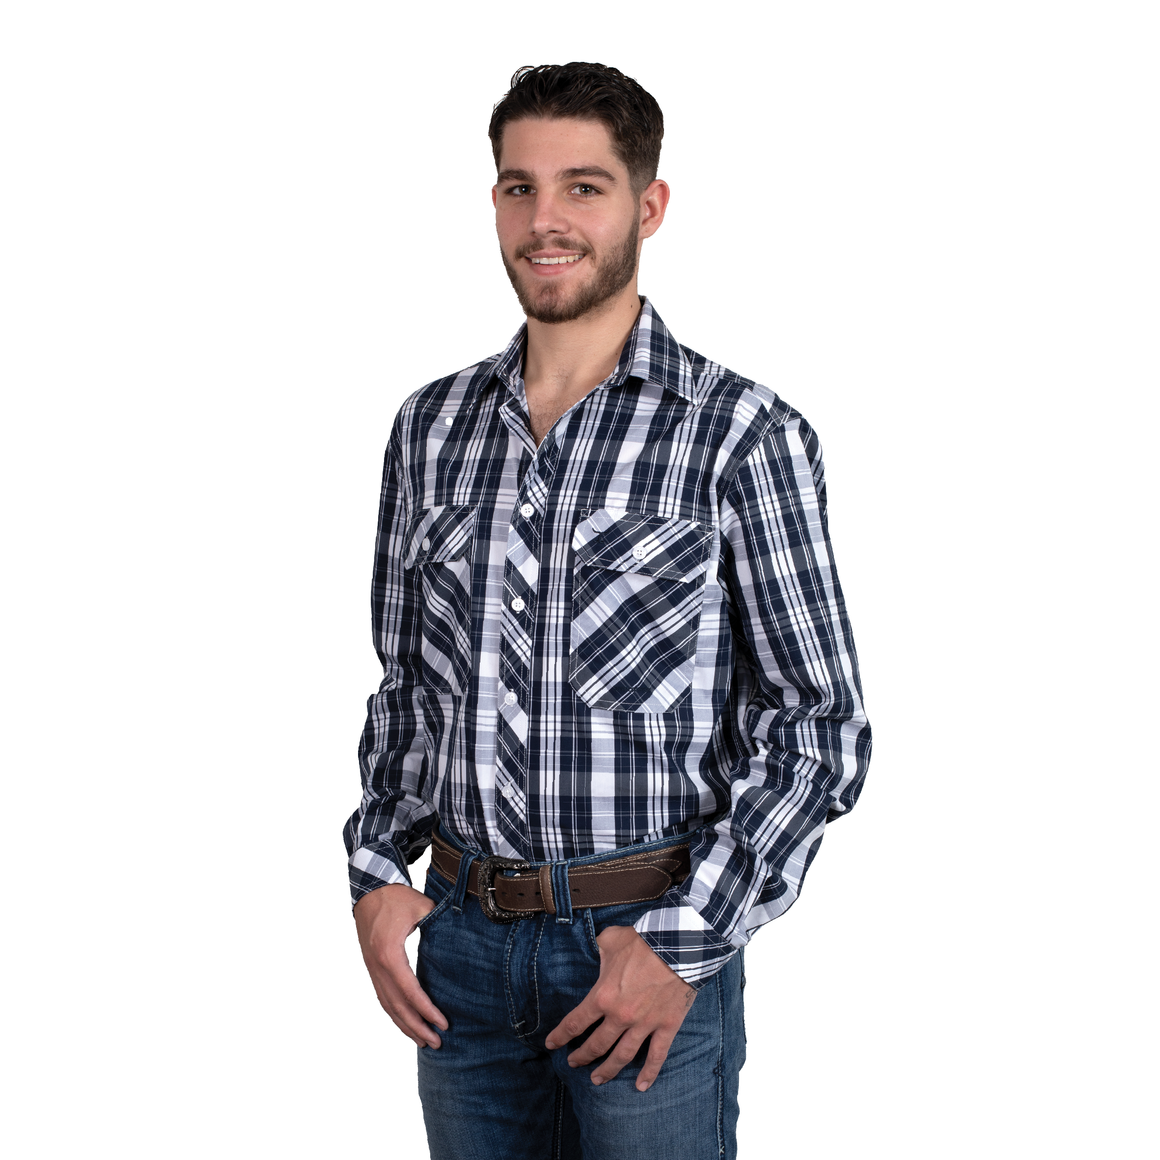 Just Country Mens Austin Full Button Print Workshirt Navy/White Plaid